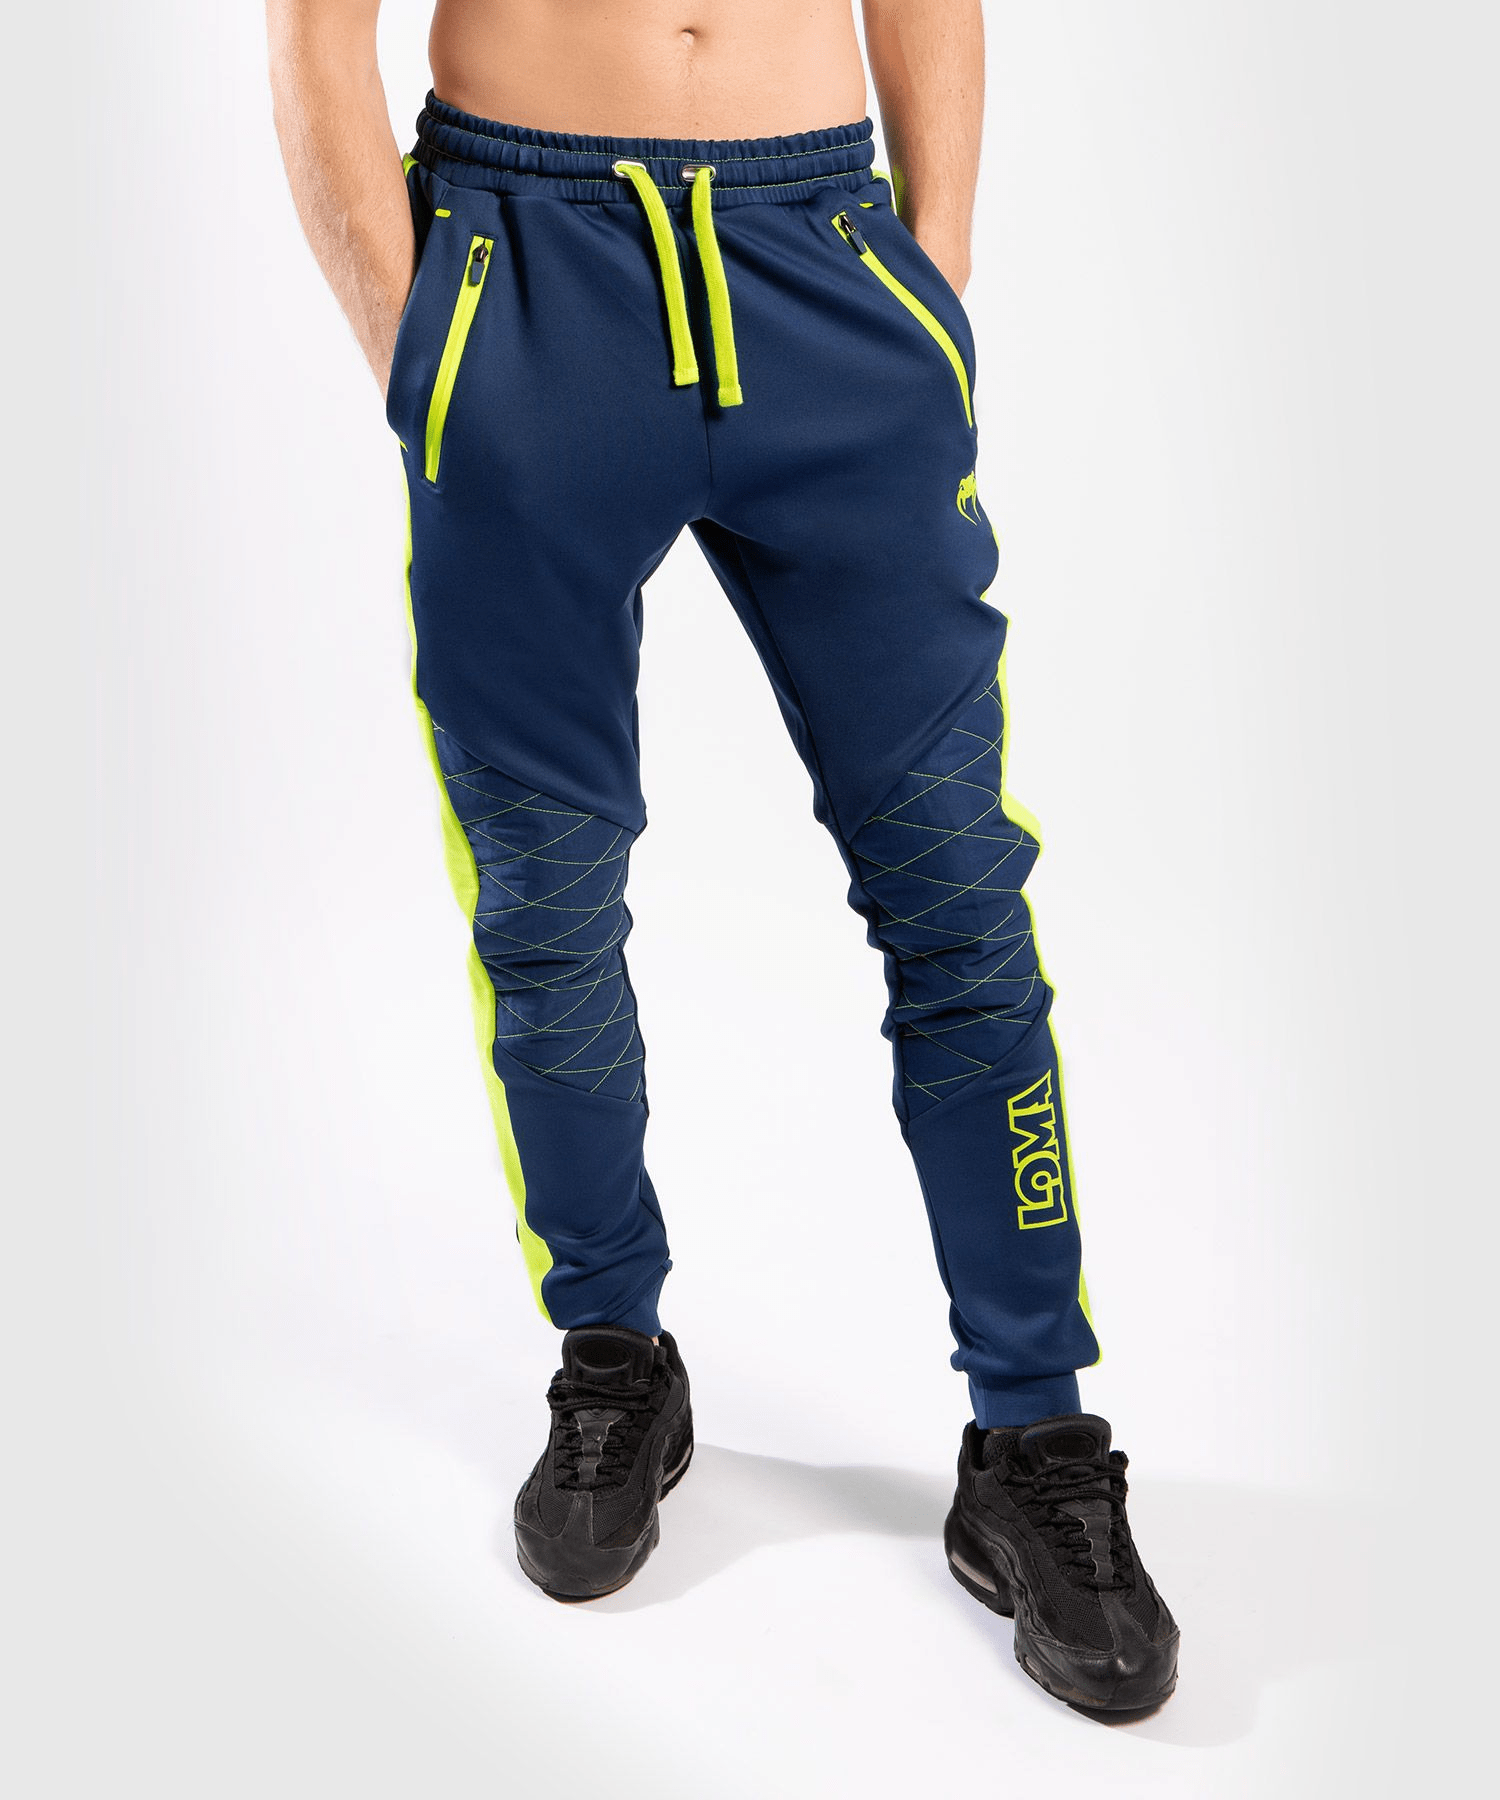 blue and yellow champion joggers